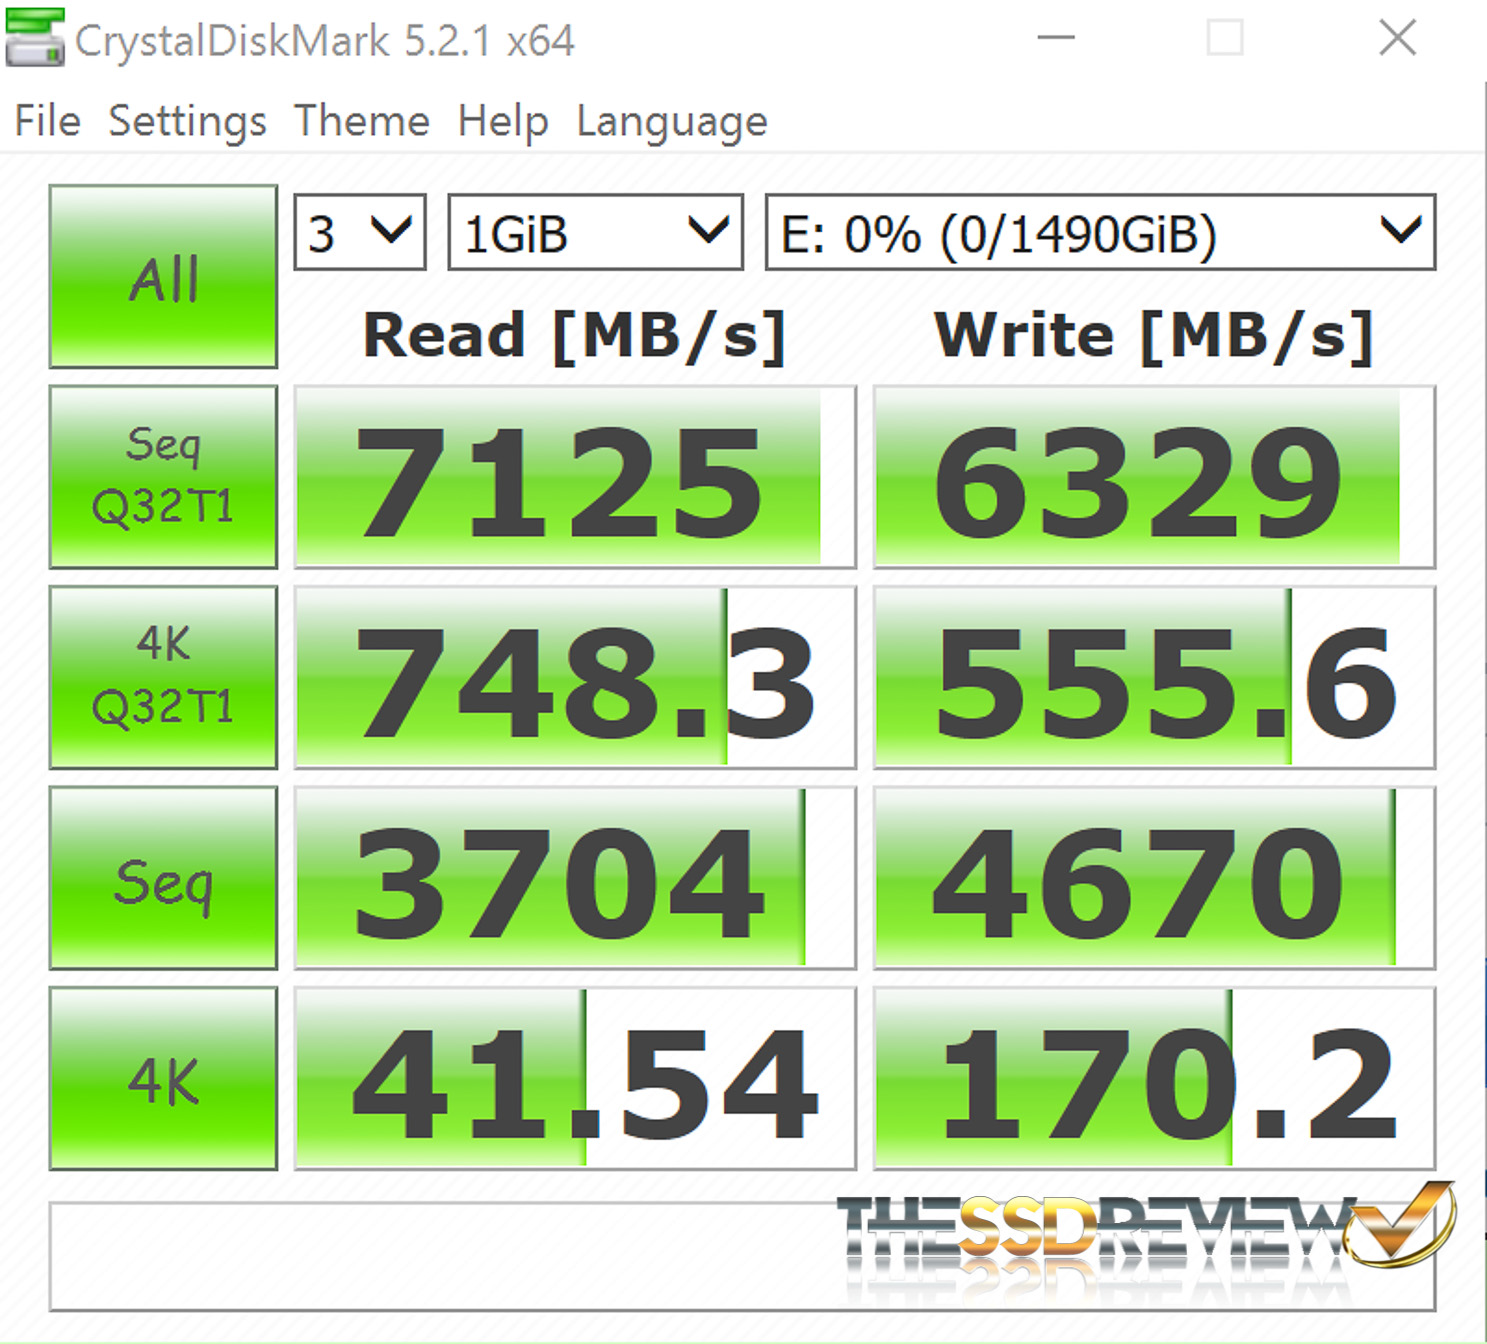 Kingston DCP1000 NVMe SSD Reaches 7GB/s Is This the Fastest? The SSD Review